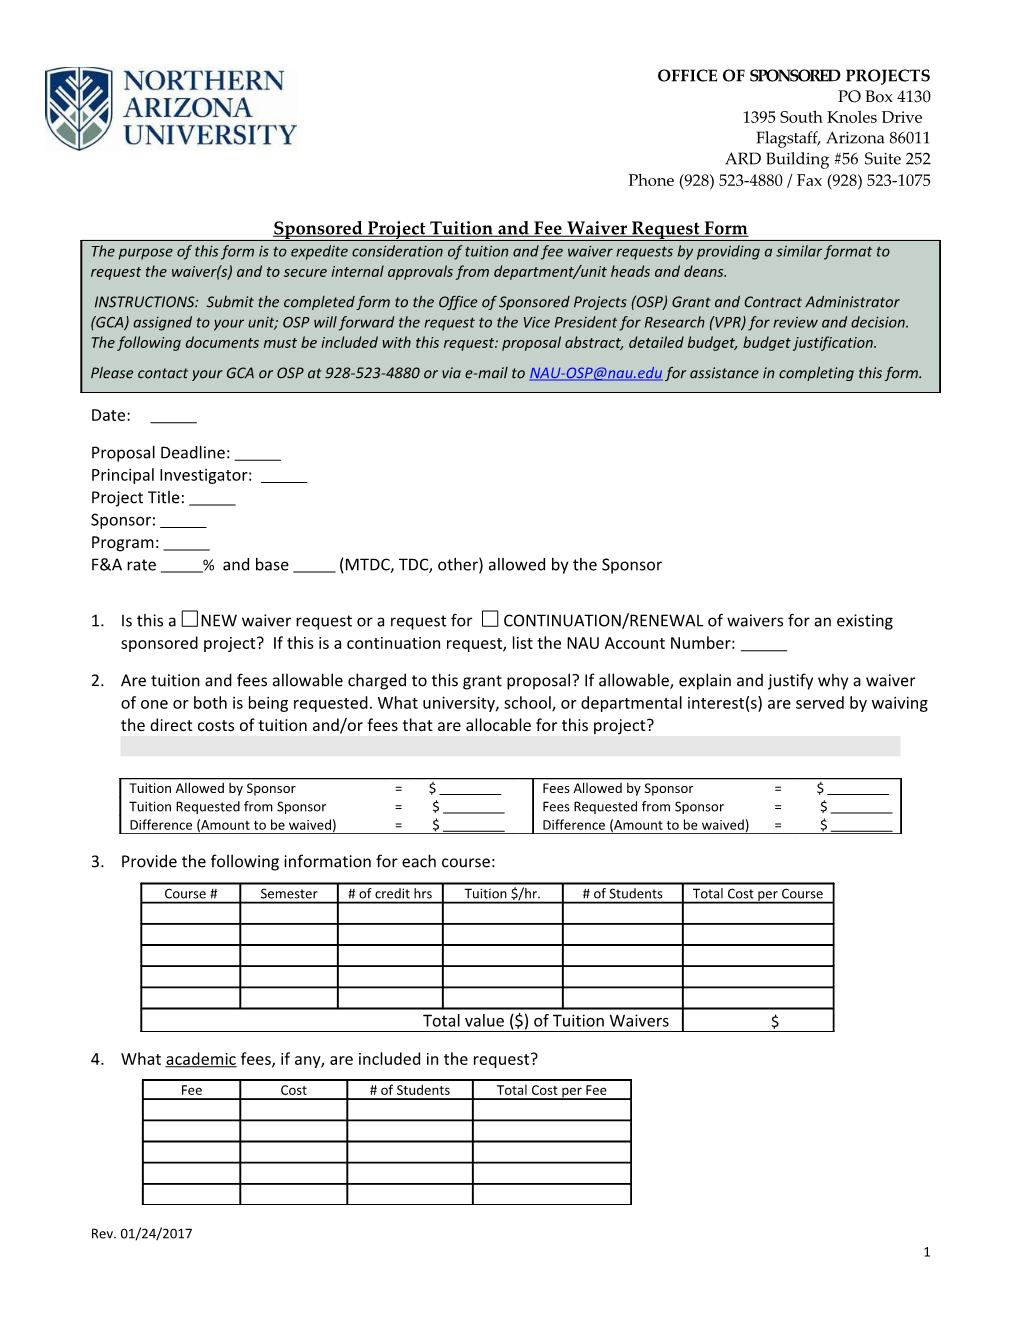 Sponsored Project Tuition and Fee Waiver Request Form